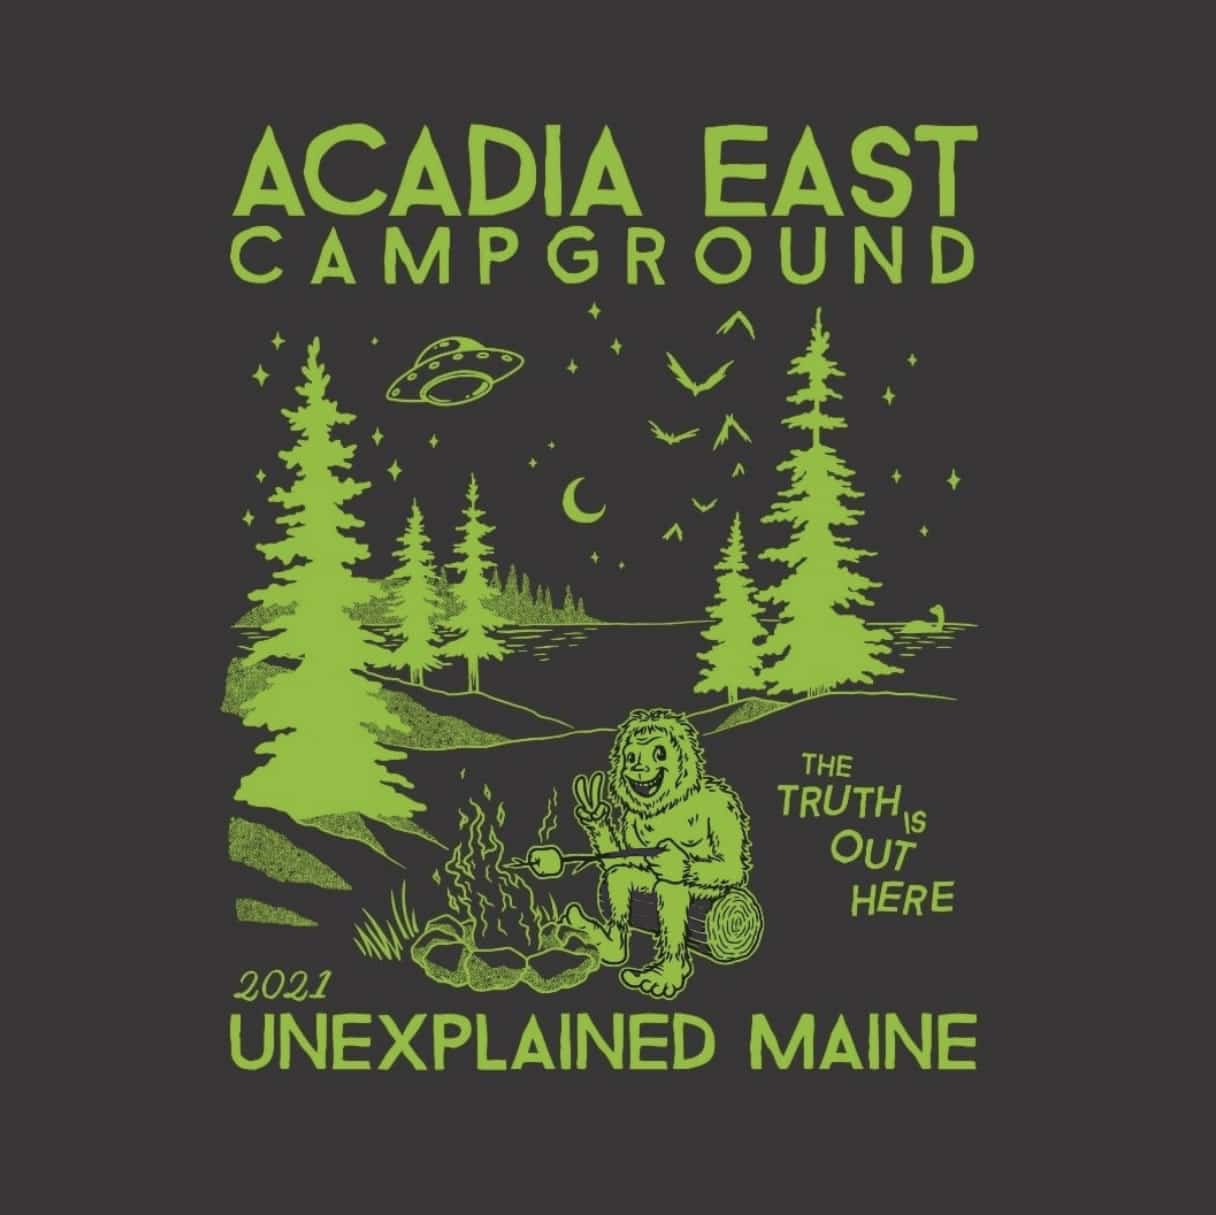 https://acadiaeastcampground.com/wp-content/uploads/2021/06/bigfoot-camping-weekend-event.jpg